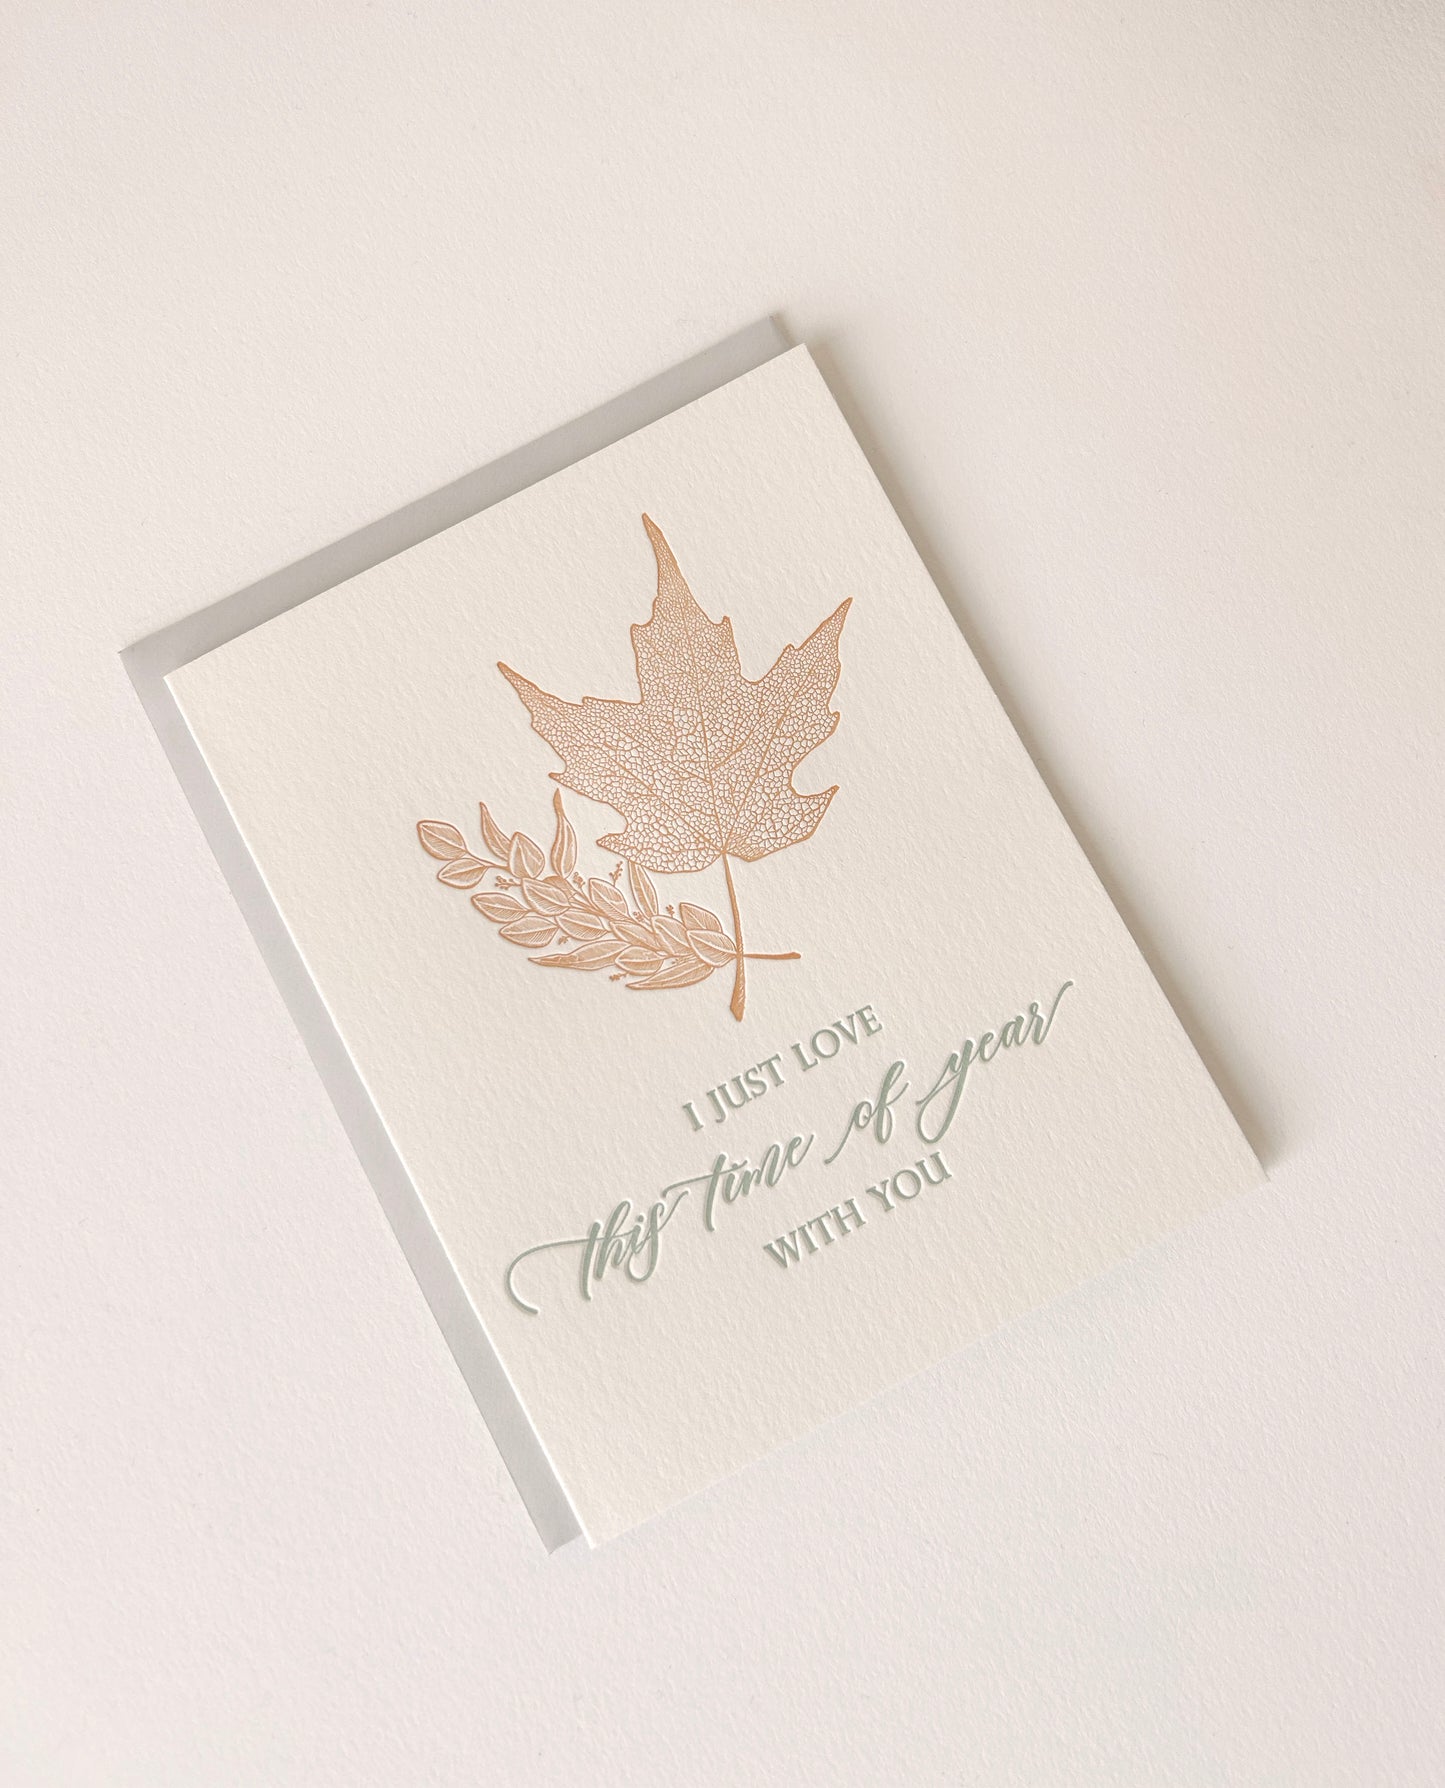 Letterpress love card with leaves that says "I Just Love This Time Of Year With You" by Rust Belt Love